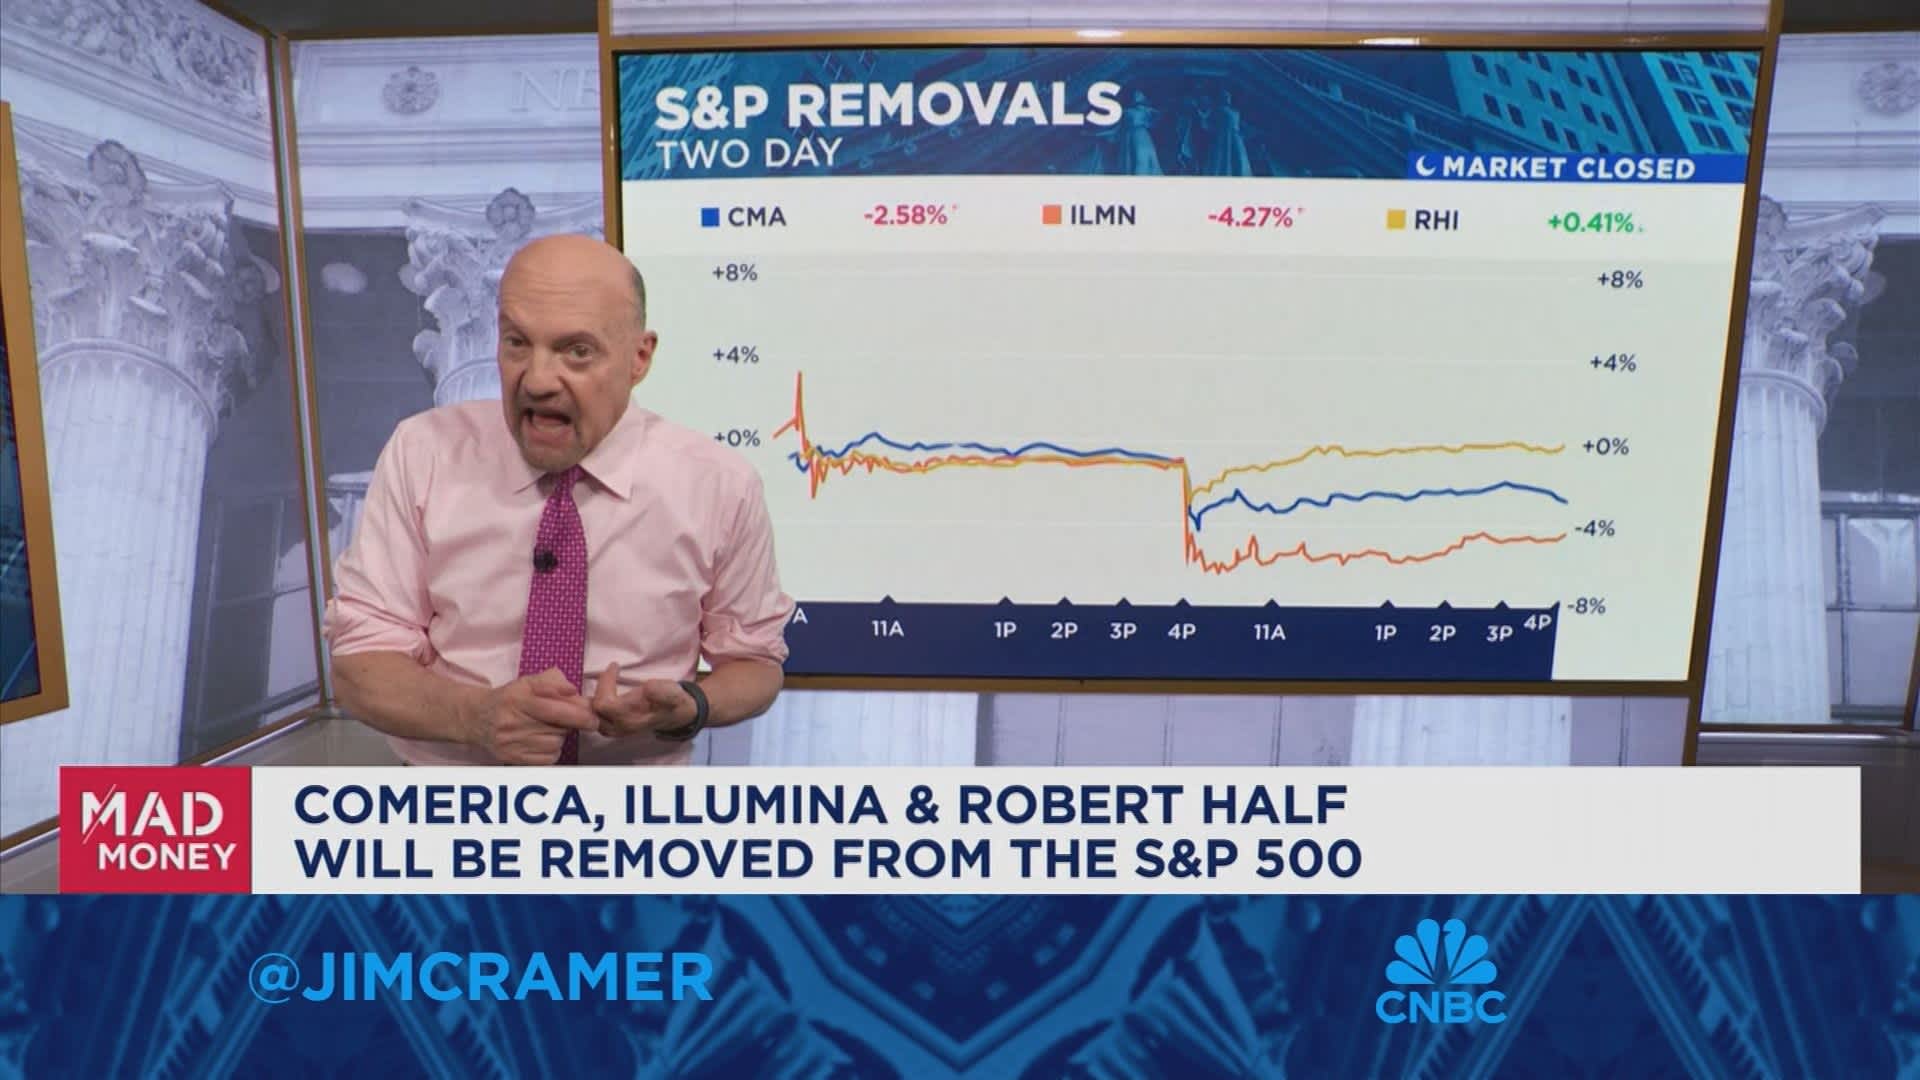 If history's any guide nothing good happens to companies taken out of the S&P 500, says Jim Cramer